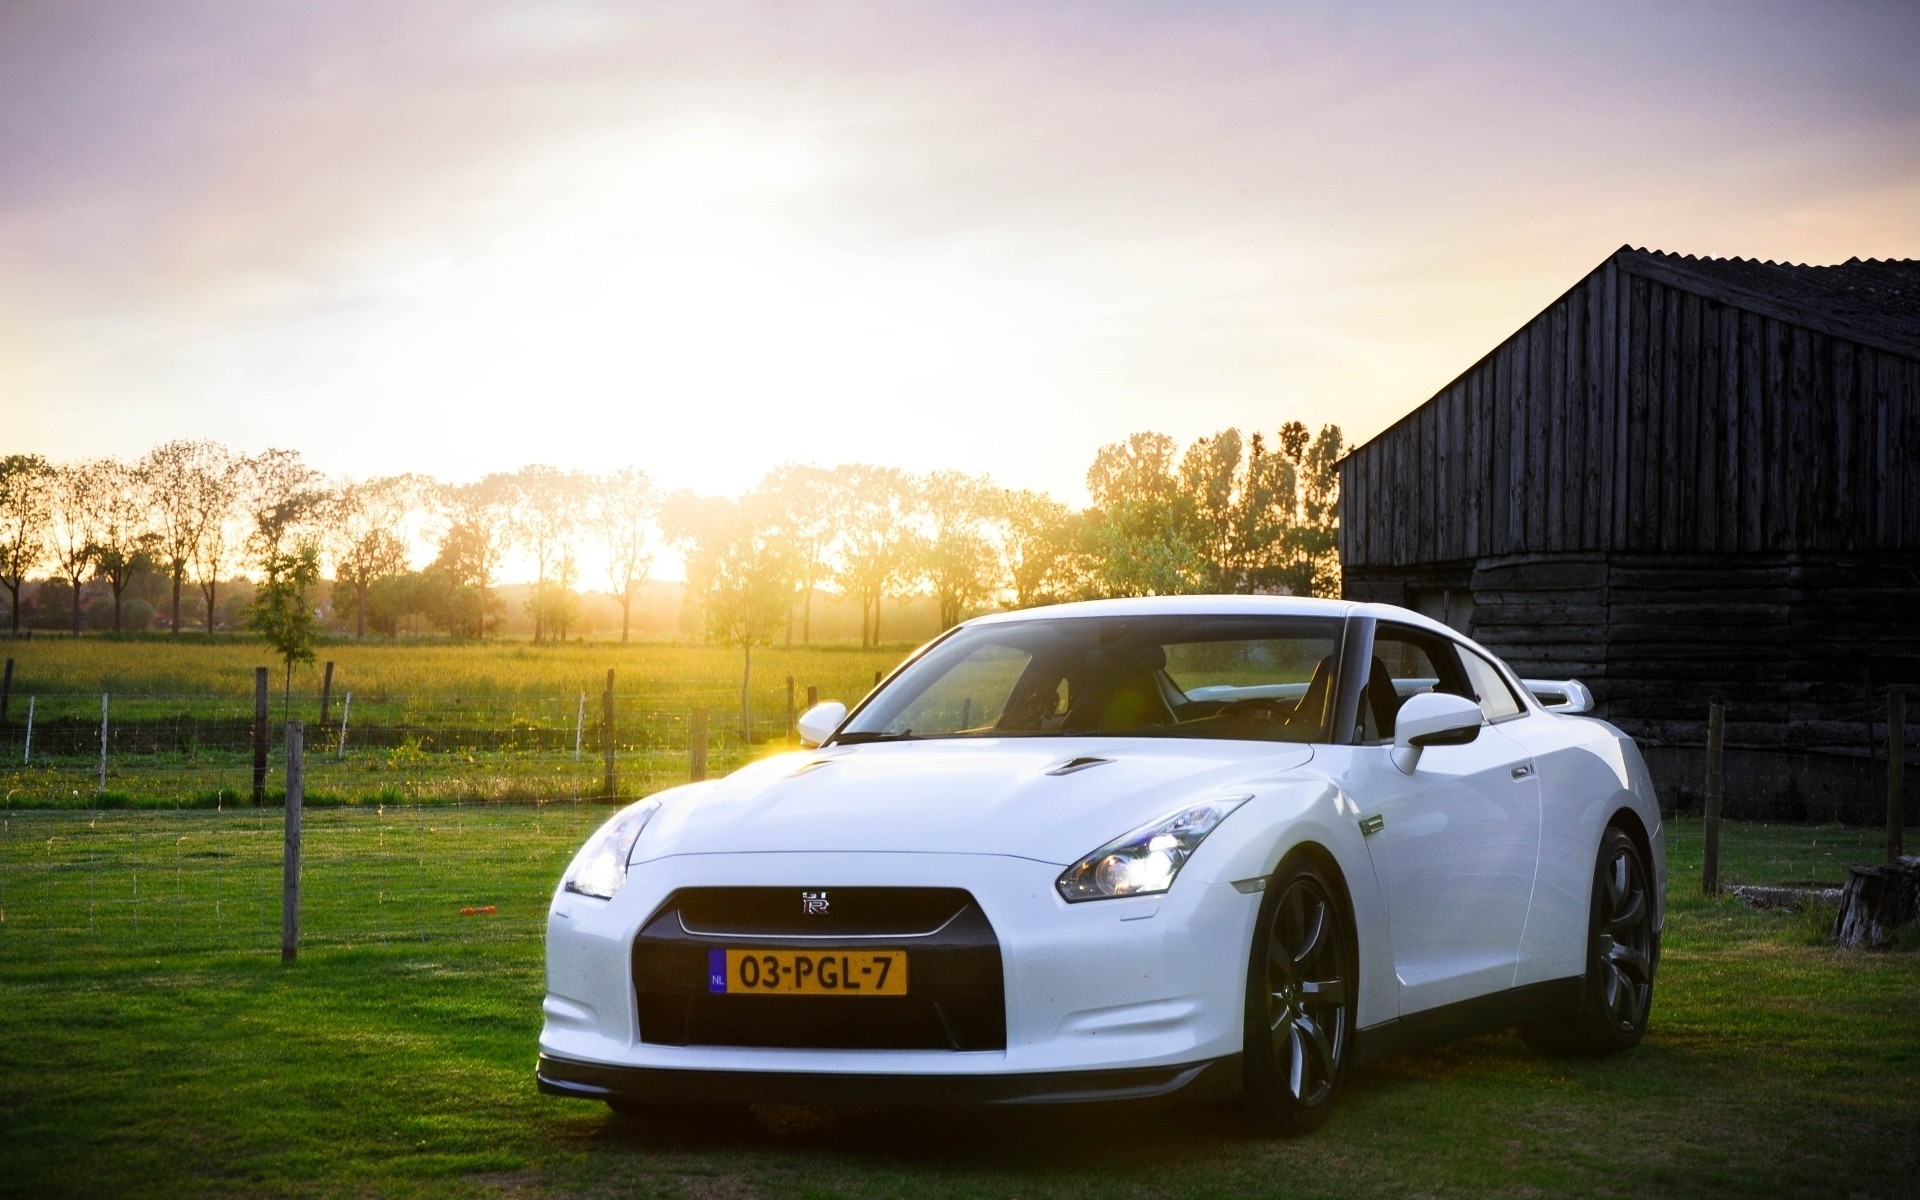 Free photo A white Nissan GTR in the village